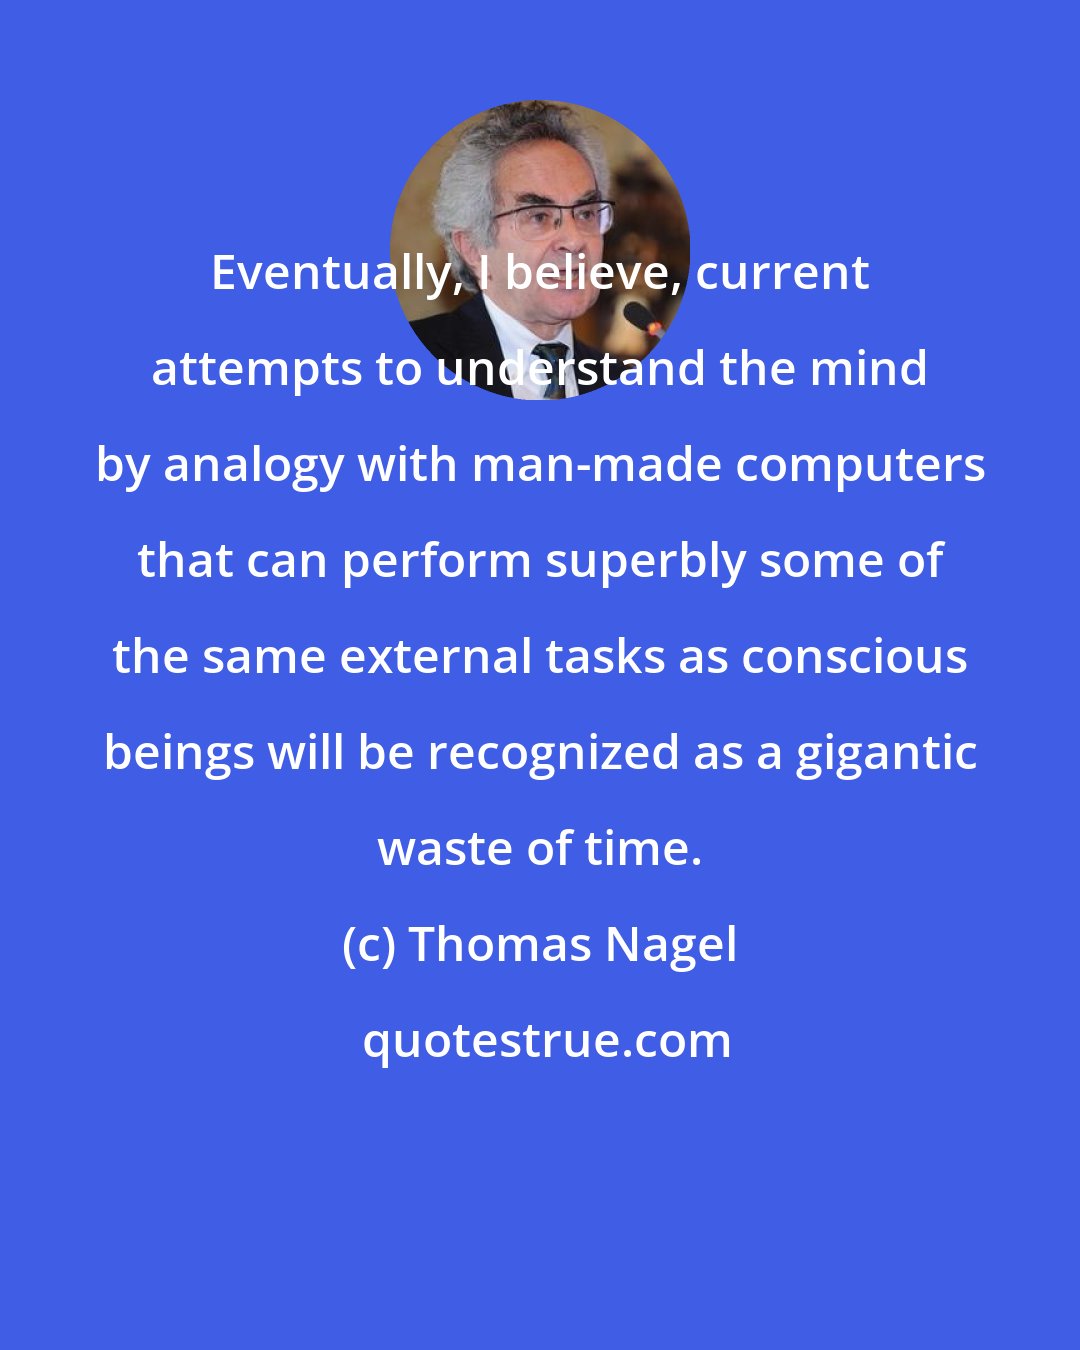 Thomas Nagel: Eventually, I believe, current attempts to understand the mind by analogy with man-made computers that can perform superbly some of the same external tasks as conscious beings will be recognized as a gigantic waste of time.